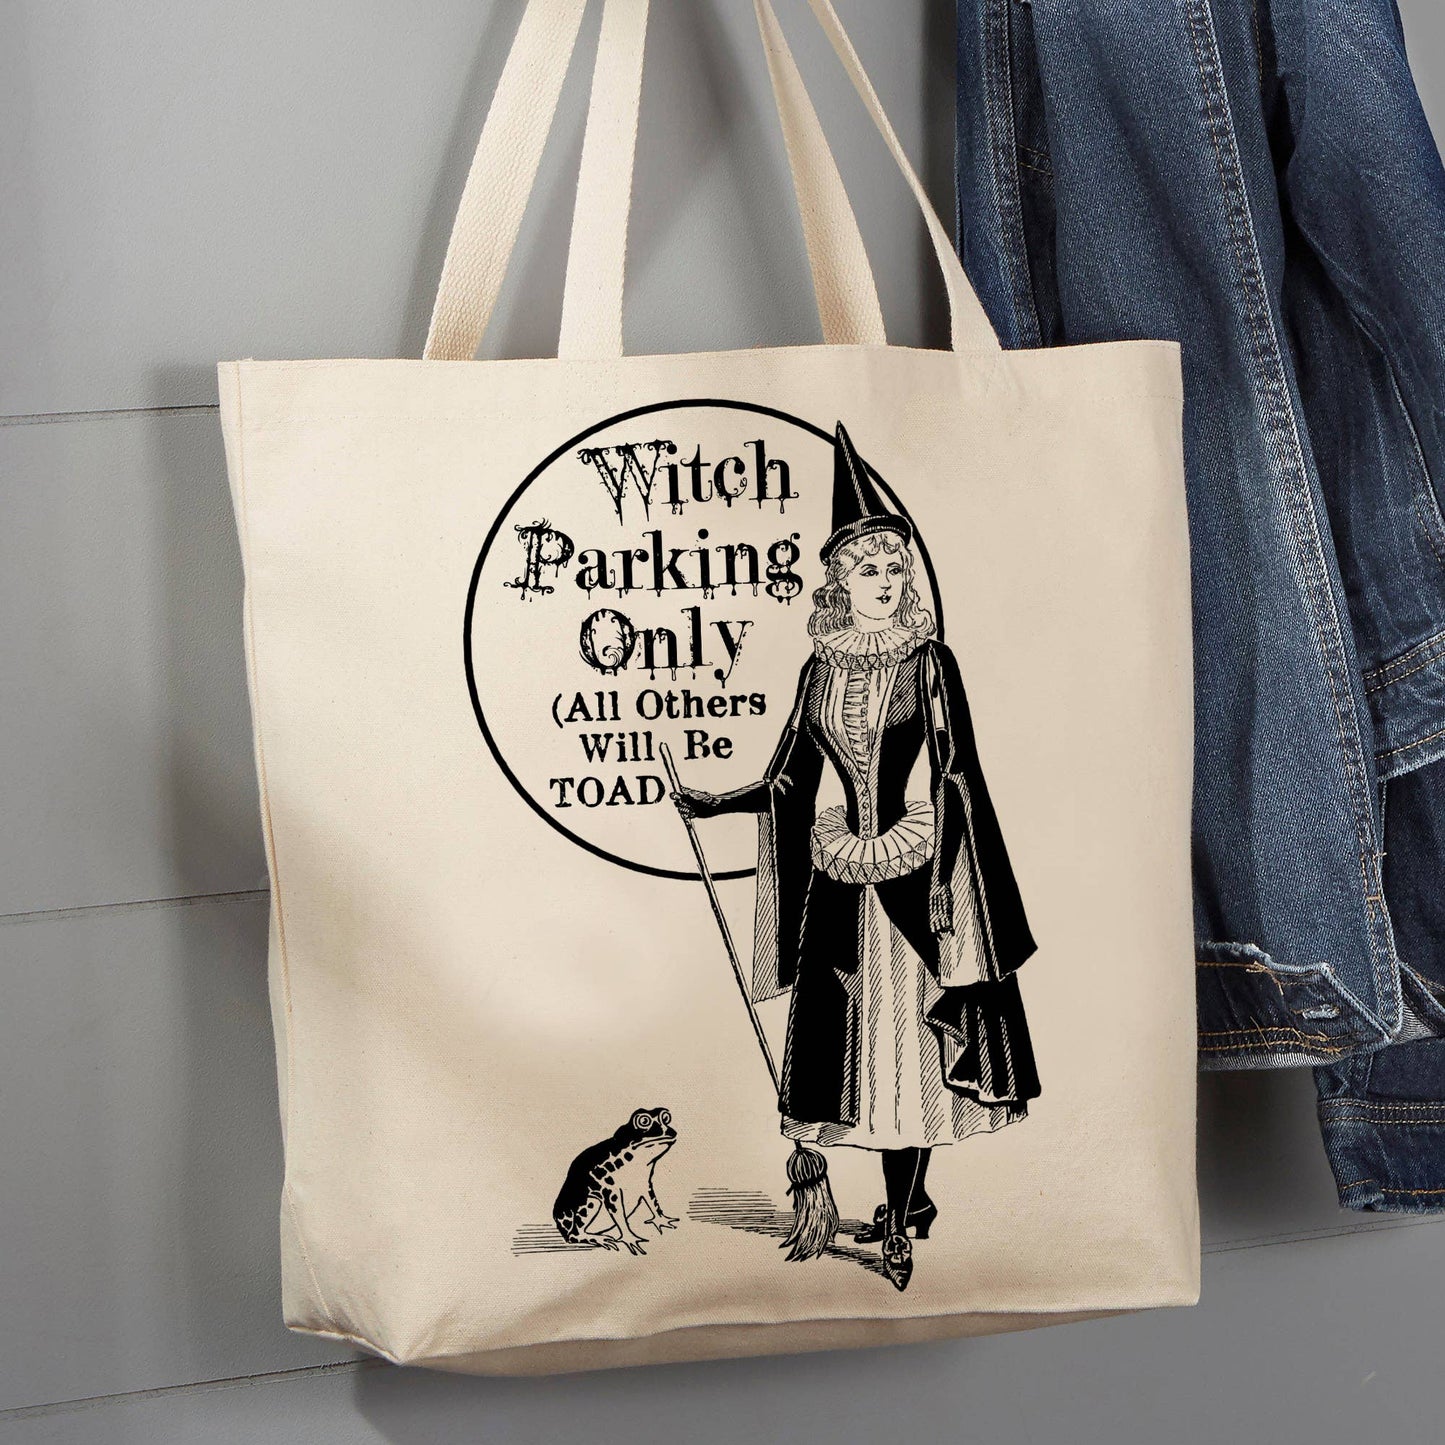 Witch Parking Only All Others Will Be Toad, 12 oz  Tote Bag